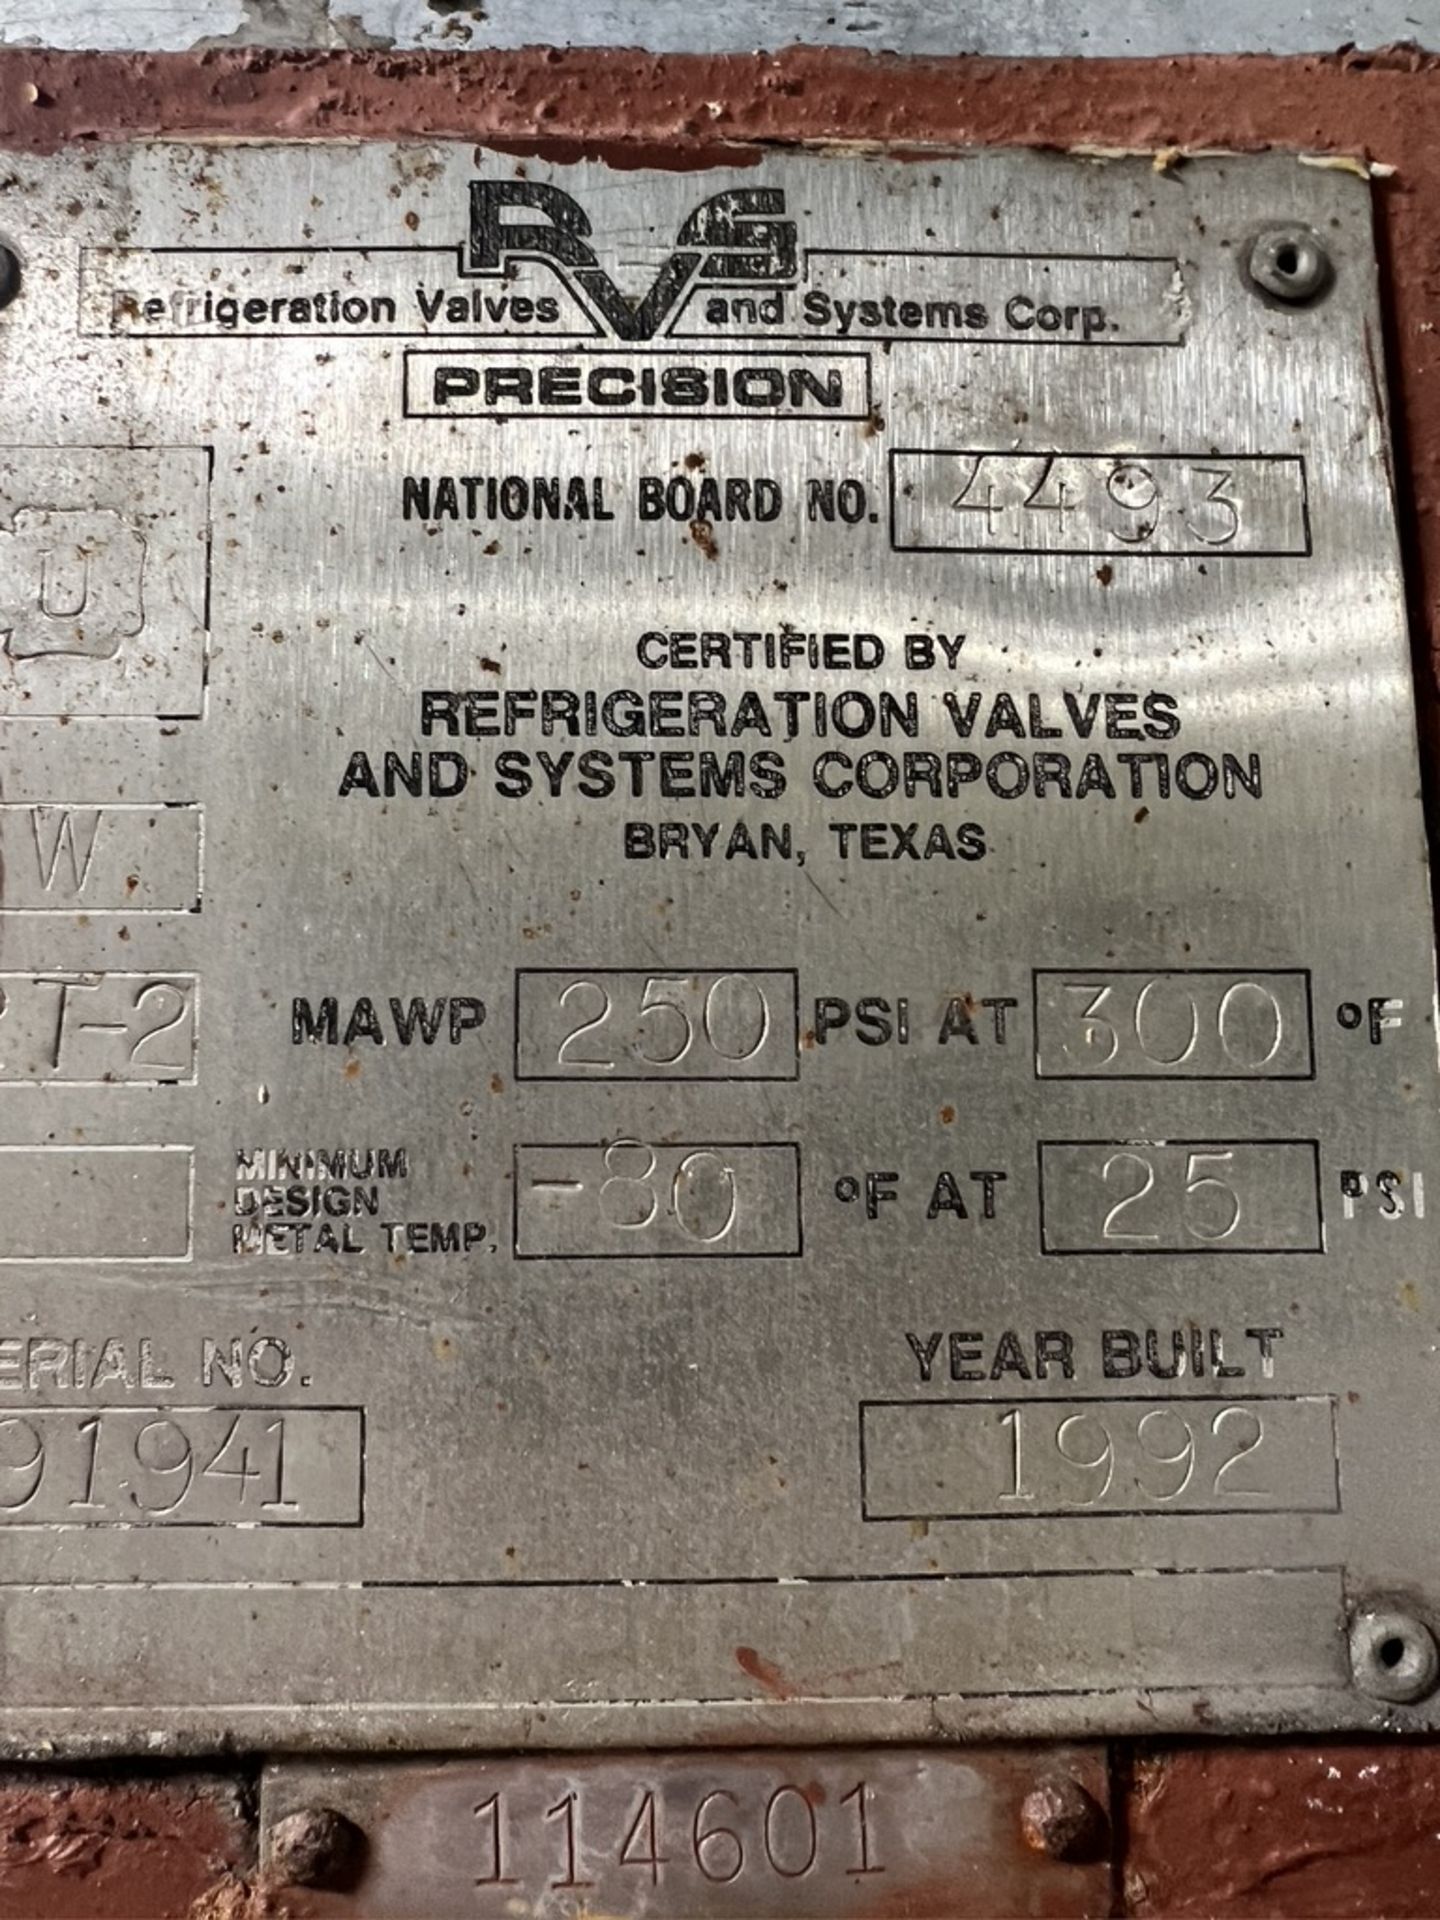 PRECISION AMMONIA SUPPLY TANK, S/N 91941, NATIONAL BOARD NUMBNER 4493, MAWP 250 PSI @ 300 F - Image 11 of 11